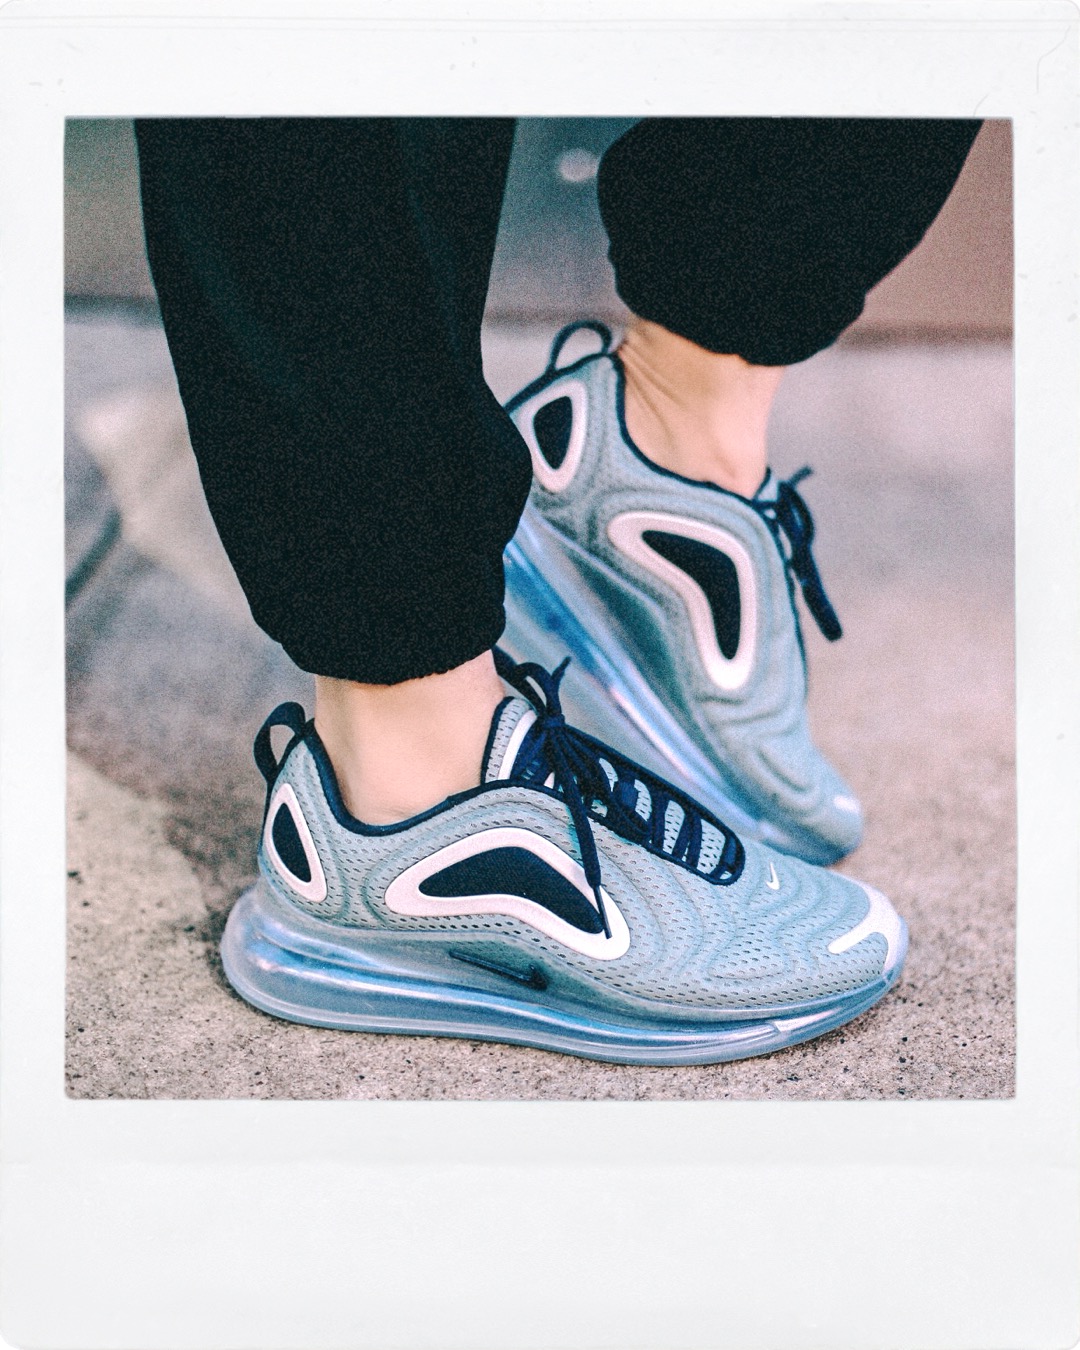 Spring is here - NIKE AIR MAX 720 - Le 